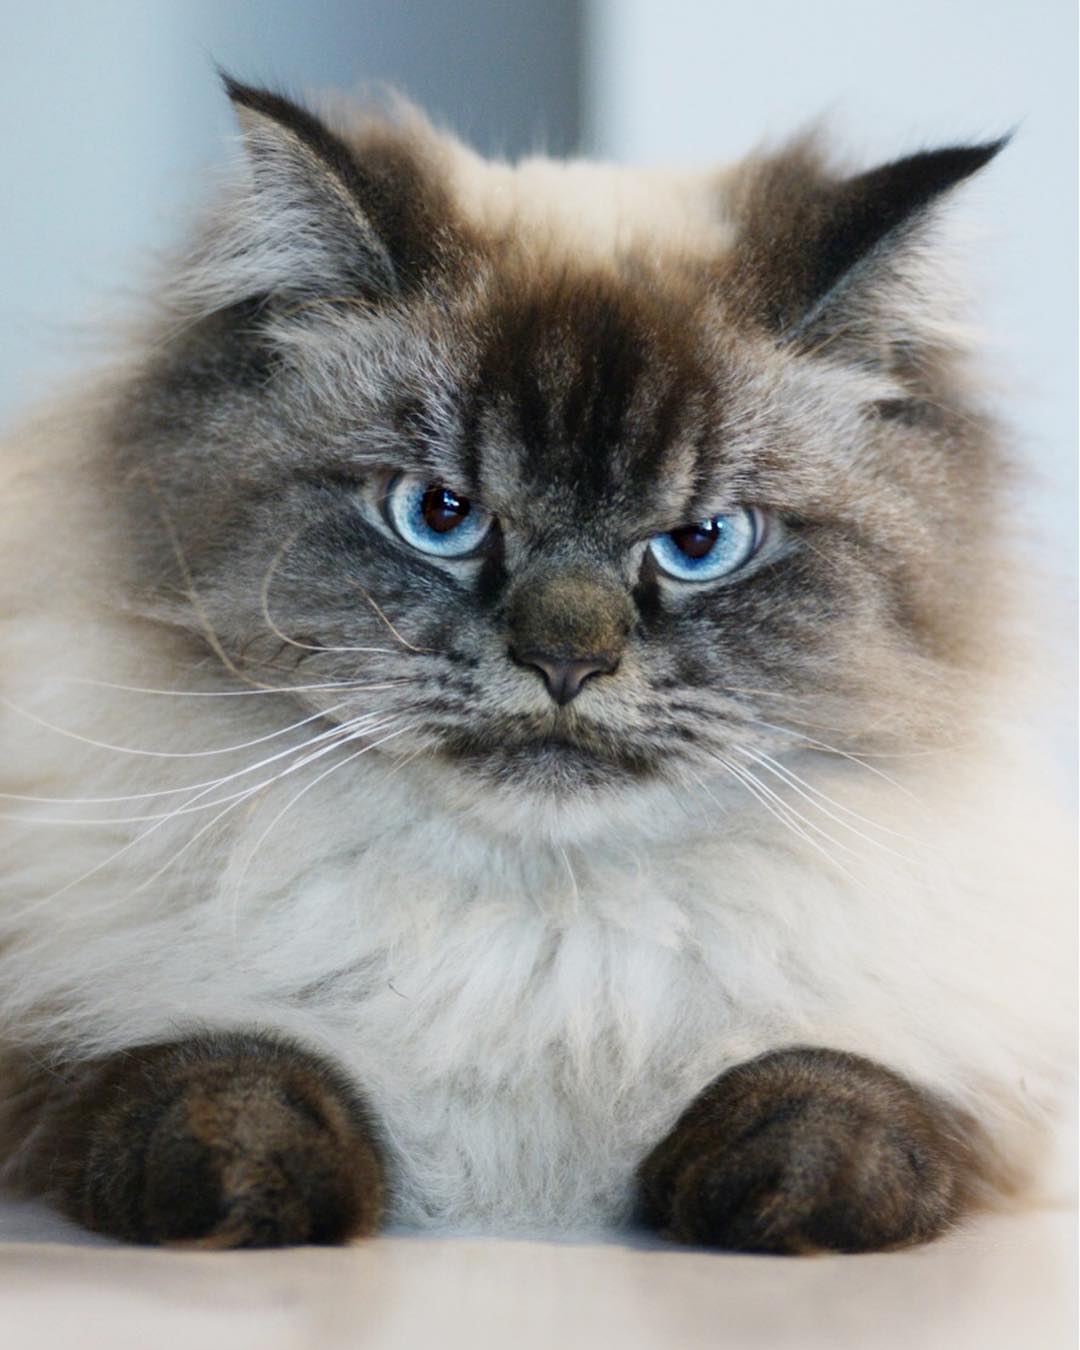 meet-merlin-the-ragdoll-cat-who-looks-always-pissed-off-page-3-of-4